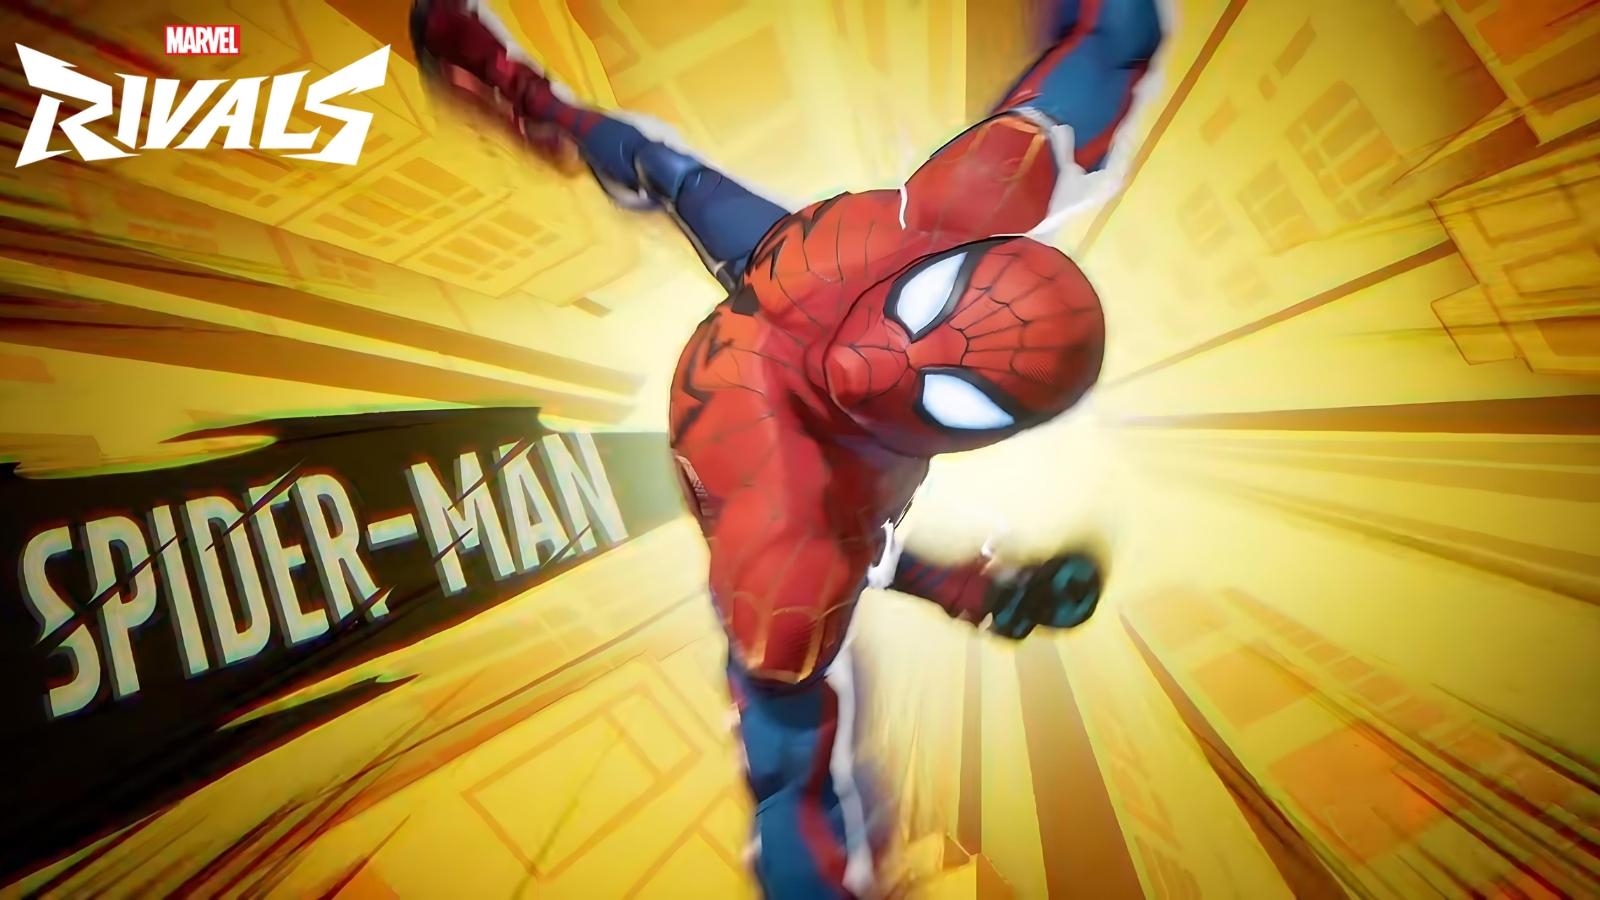 Spider-Man key introduction in Marvel Rivals